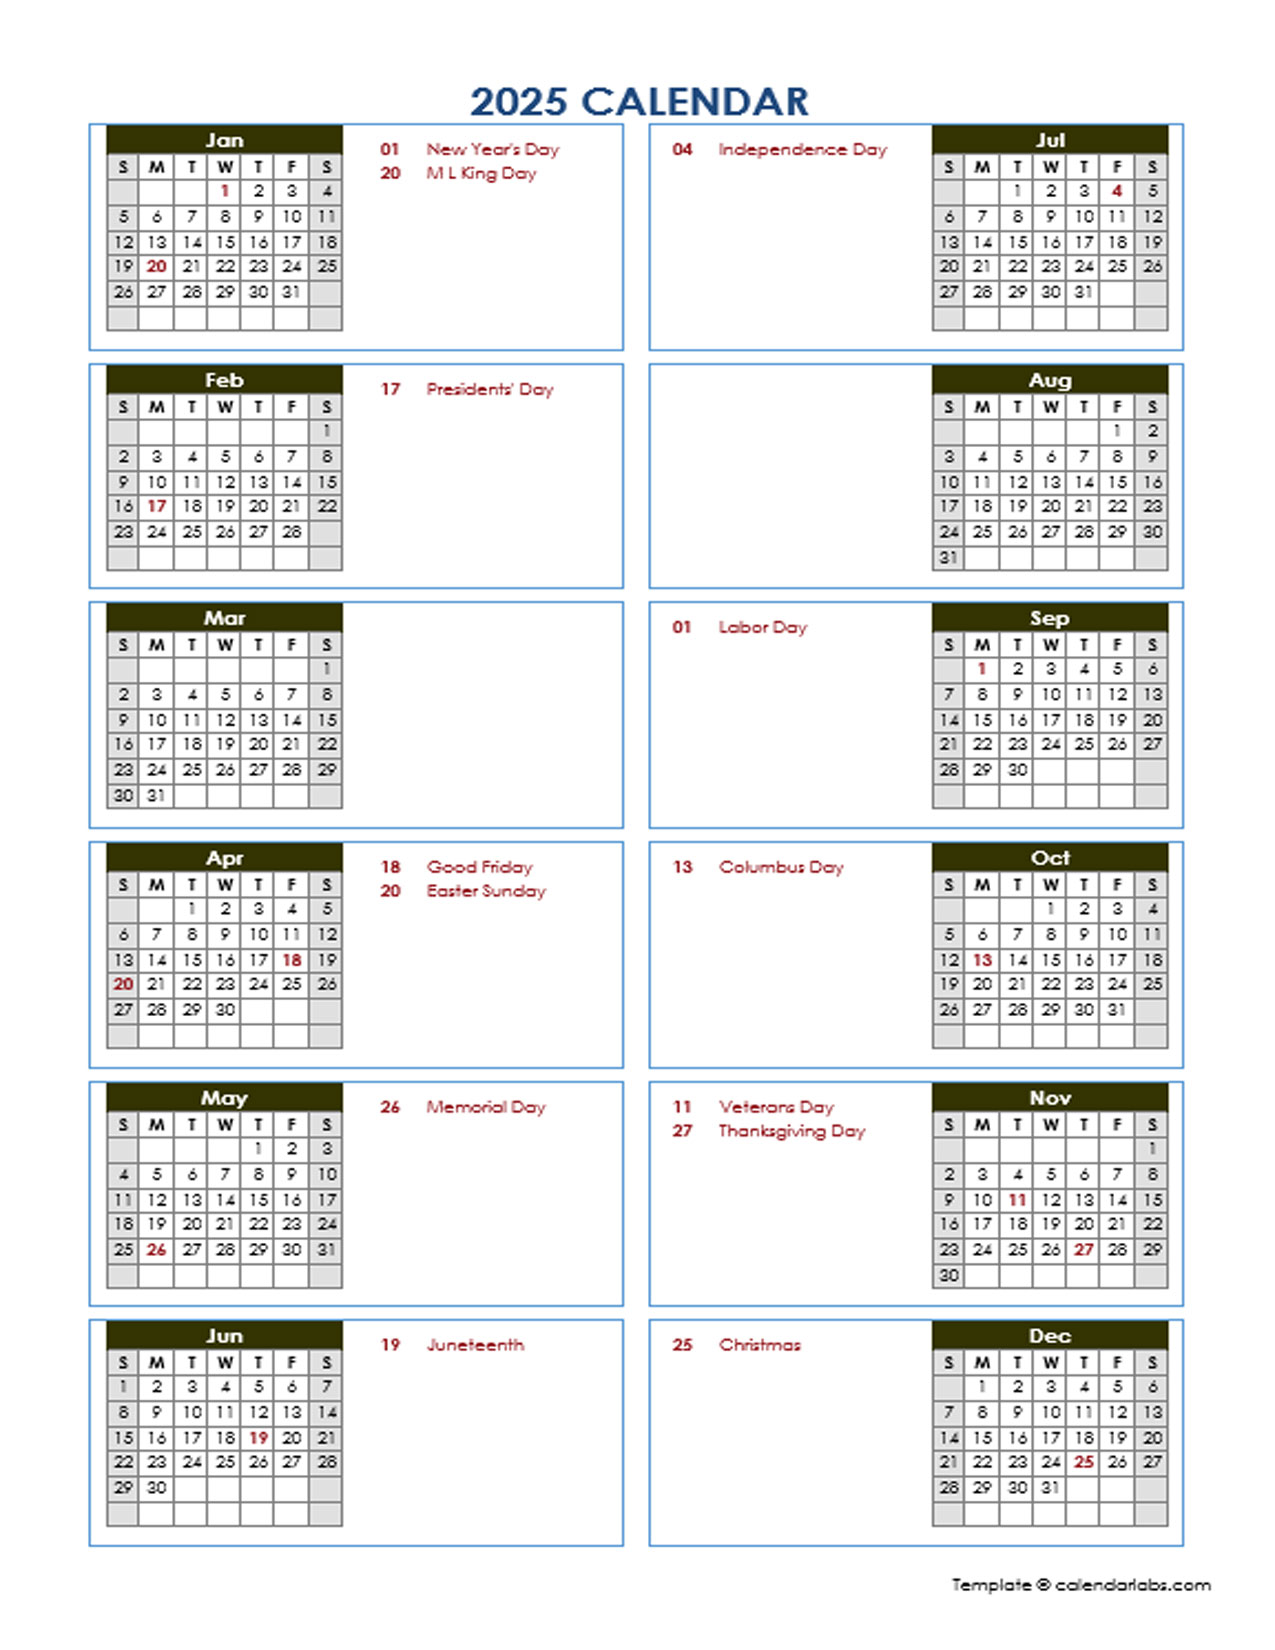 2025 Yearly Calendar Template Vertical Design - Free Printable Templates